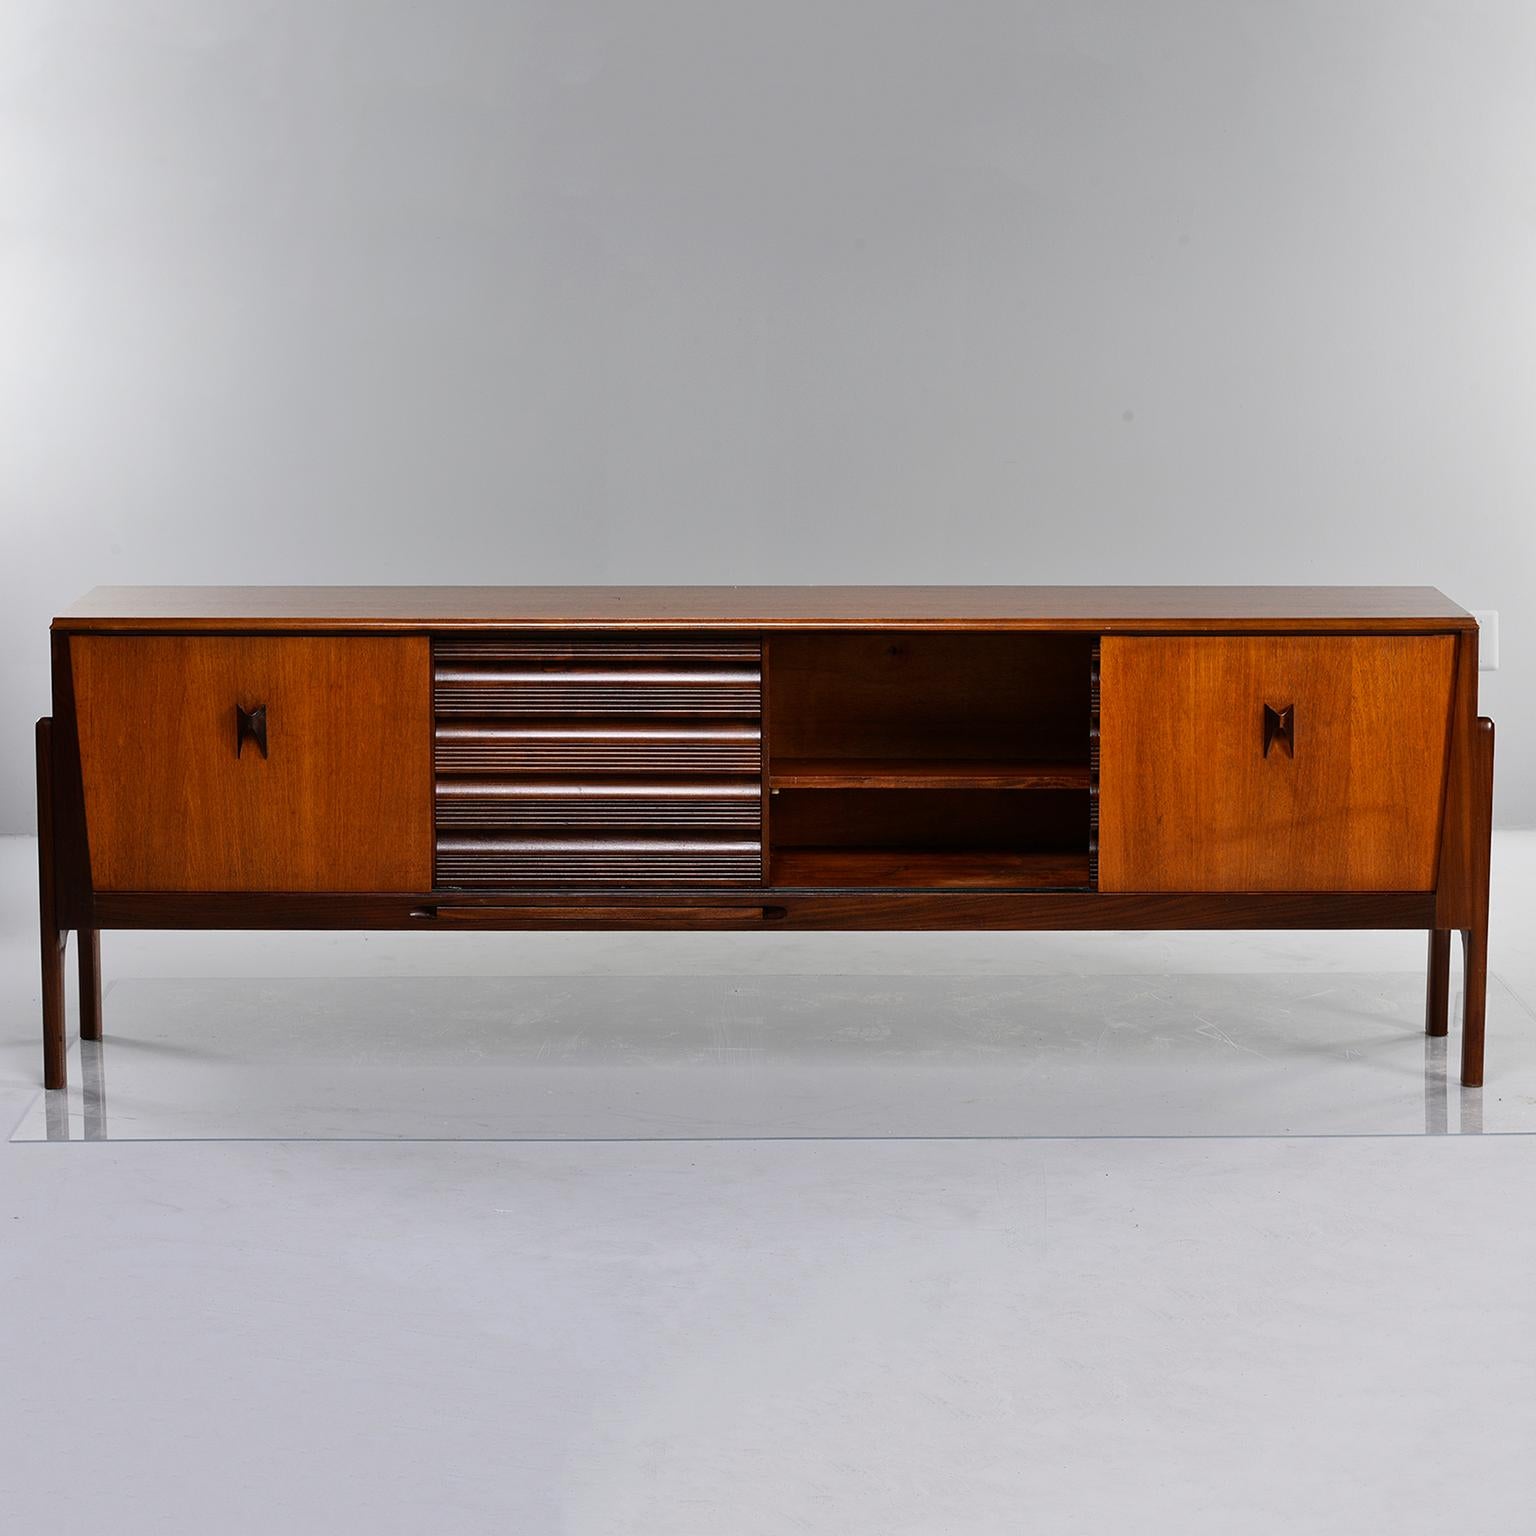 20th Century Italian Midcentury Sideboard With Multi Woods and Sliding Doors